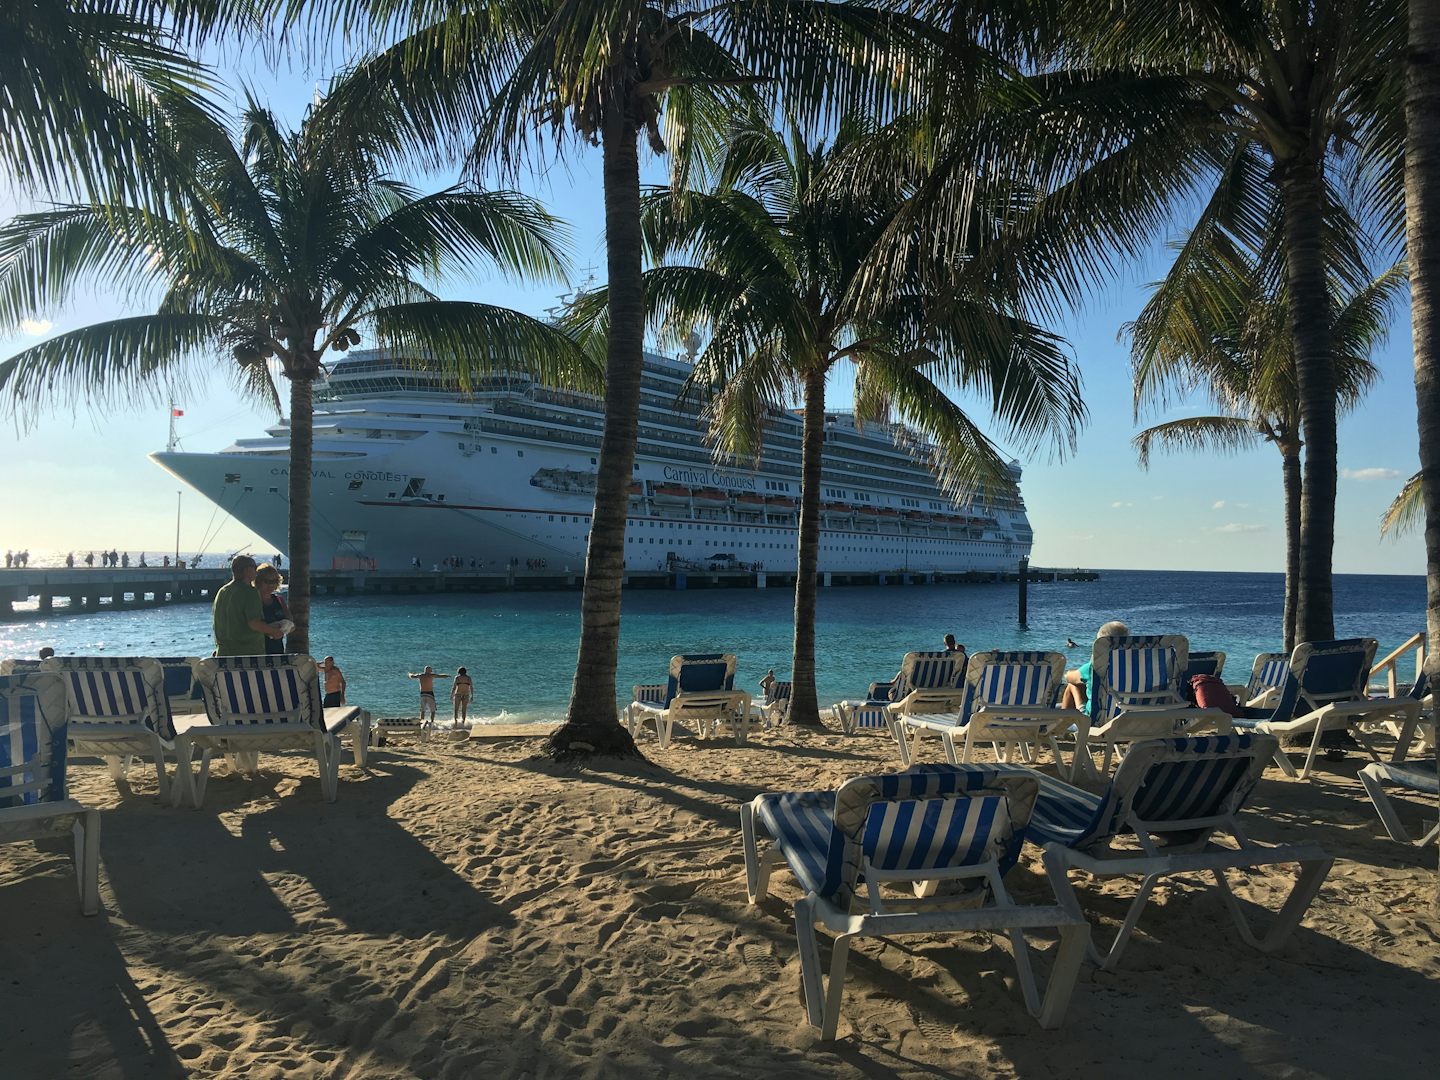 View of Carnival Conquest from Grand Turk